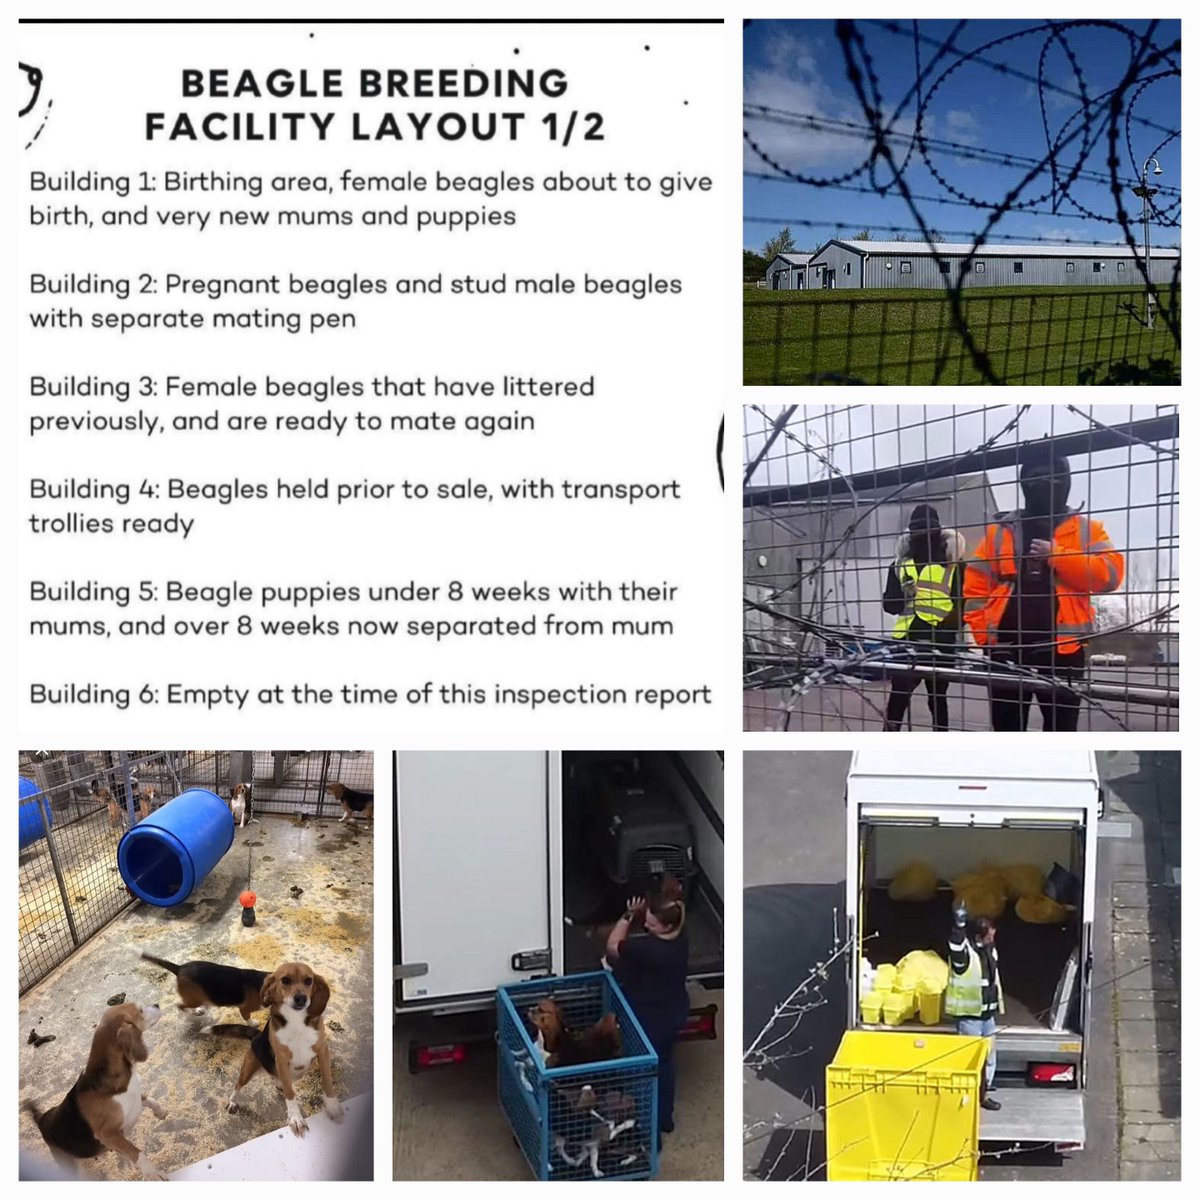 Marshall BioResources in Huntingdon UK. Thousands of puppies are just bred to be tortured and slaughtered in laboratories. No outrage. Massmurdering of puppies is regarded as normal. Beagles are not pets. They are livestock mirror.co.uk/news/uk-news/t…